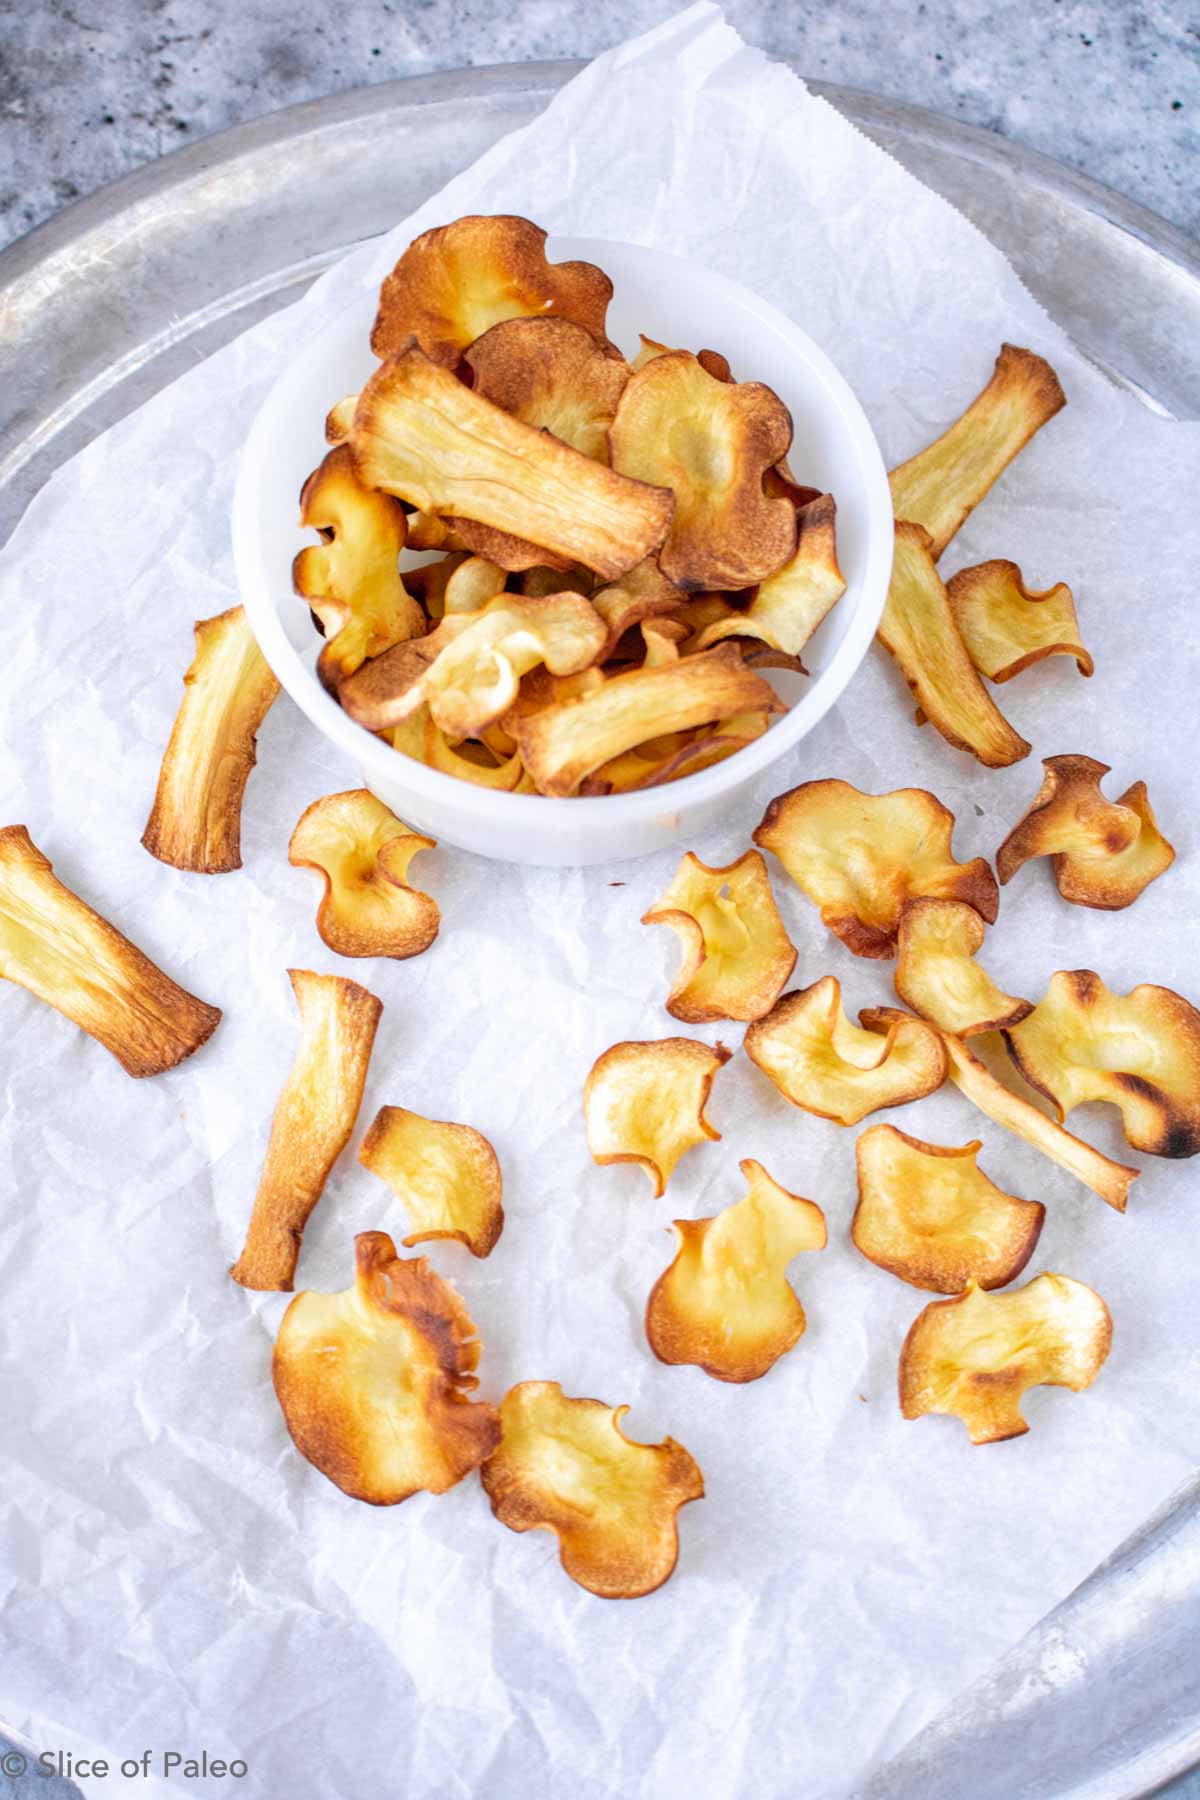 Baked Parsnip Chips ready to eat